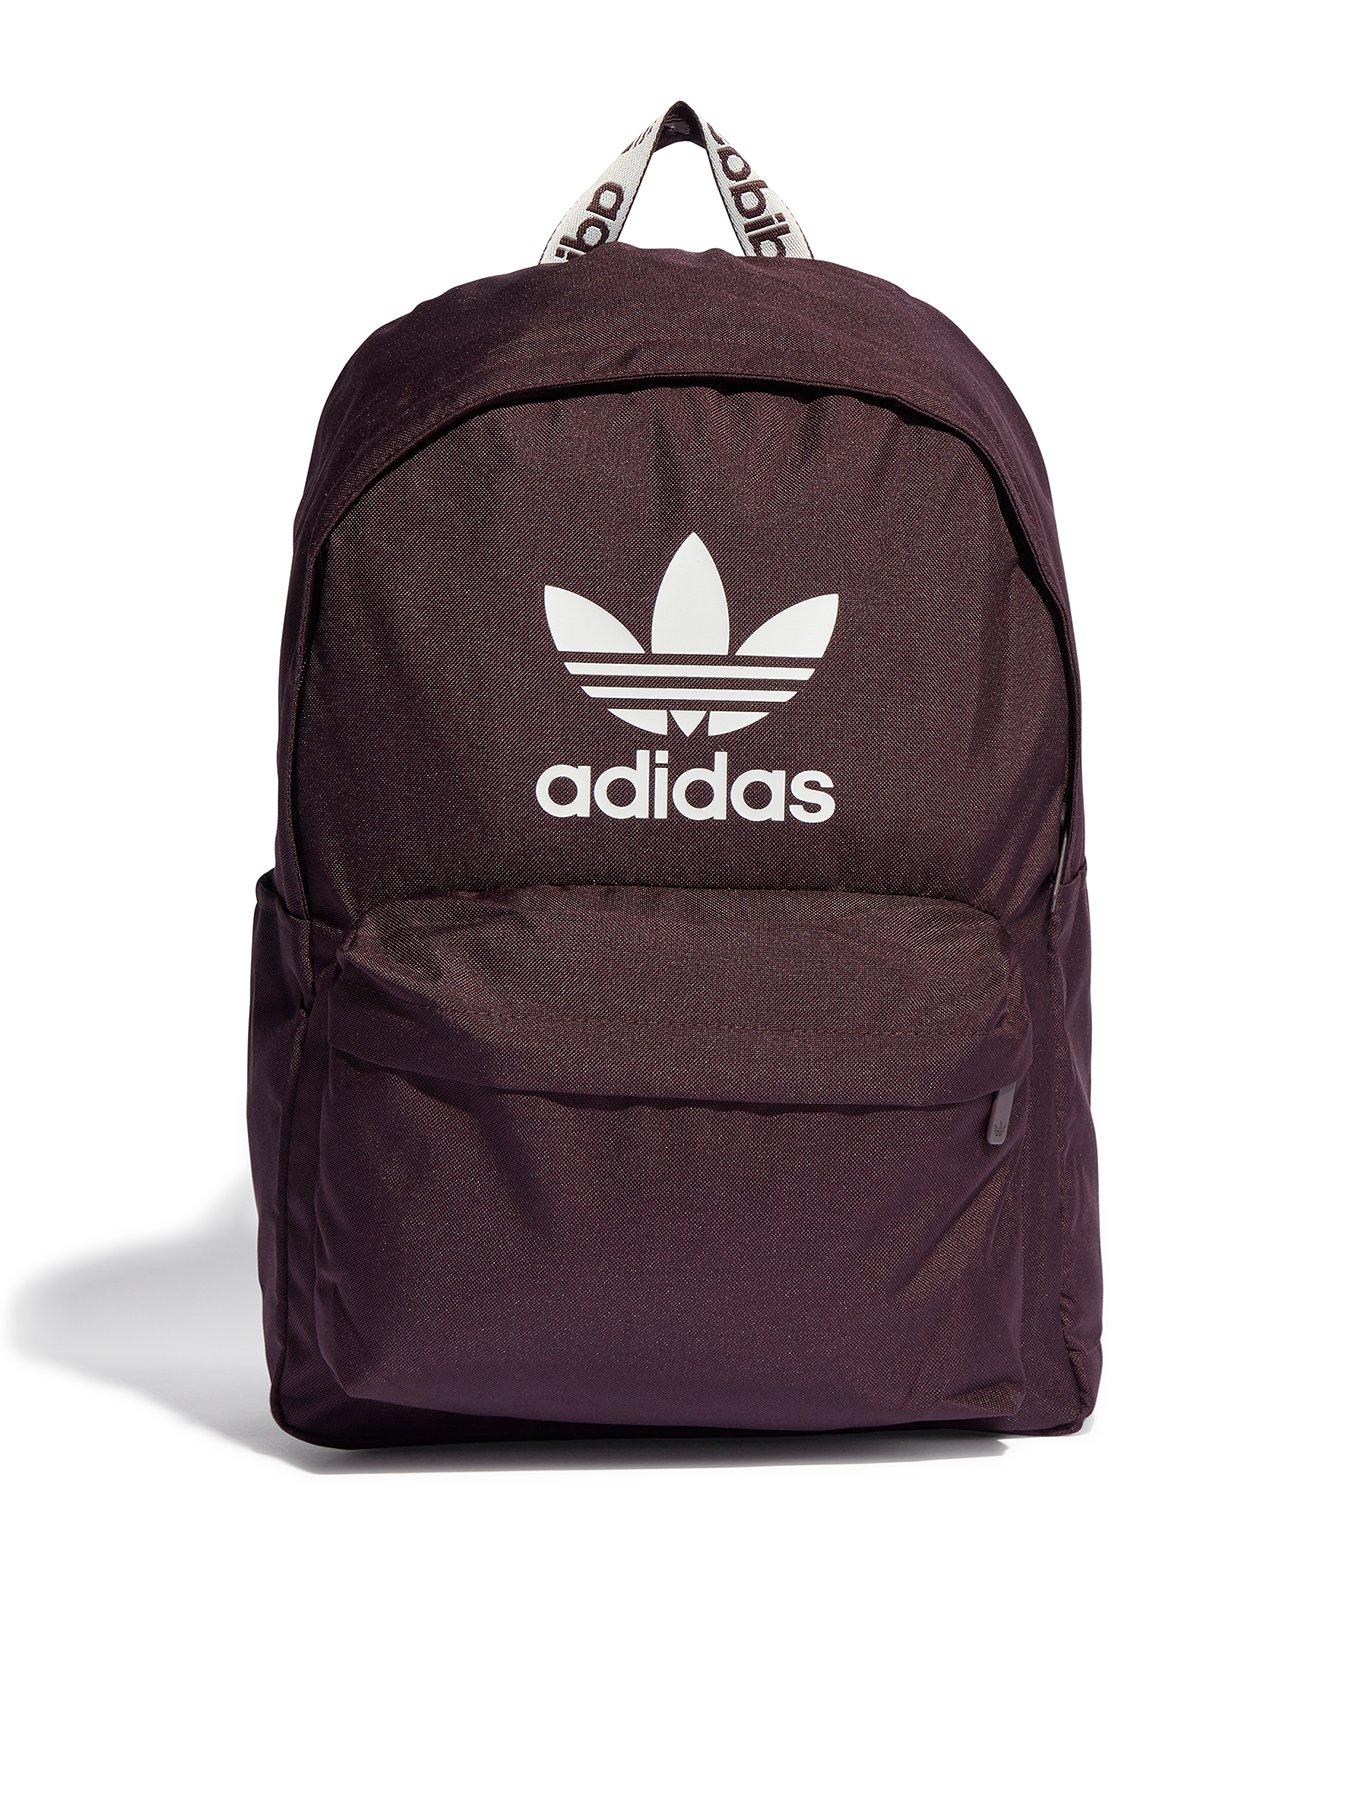 Adidas originals | bags | Mens sports accessories | & www.very.co.uk